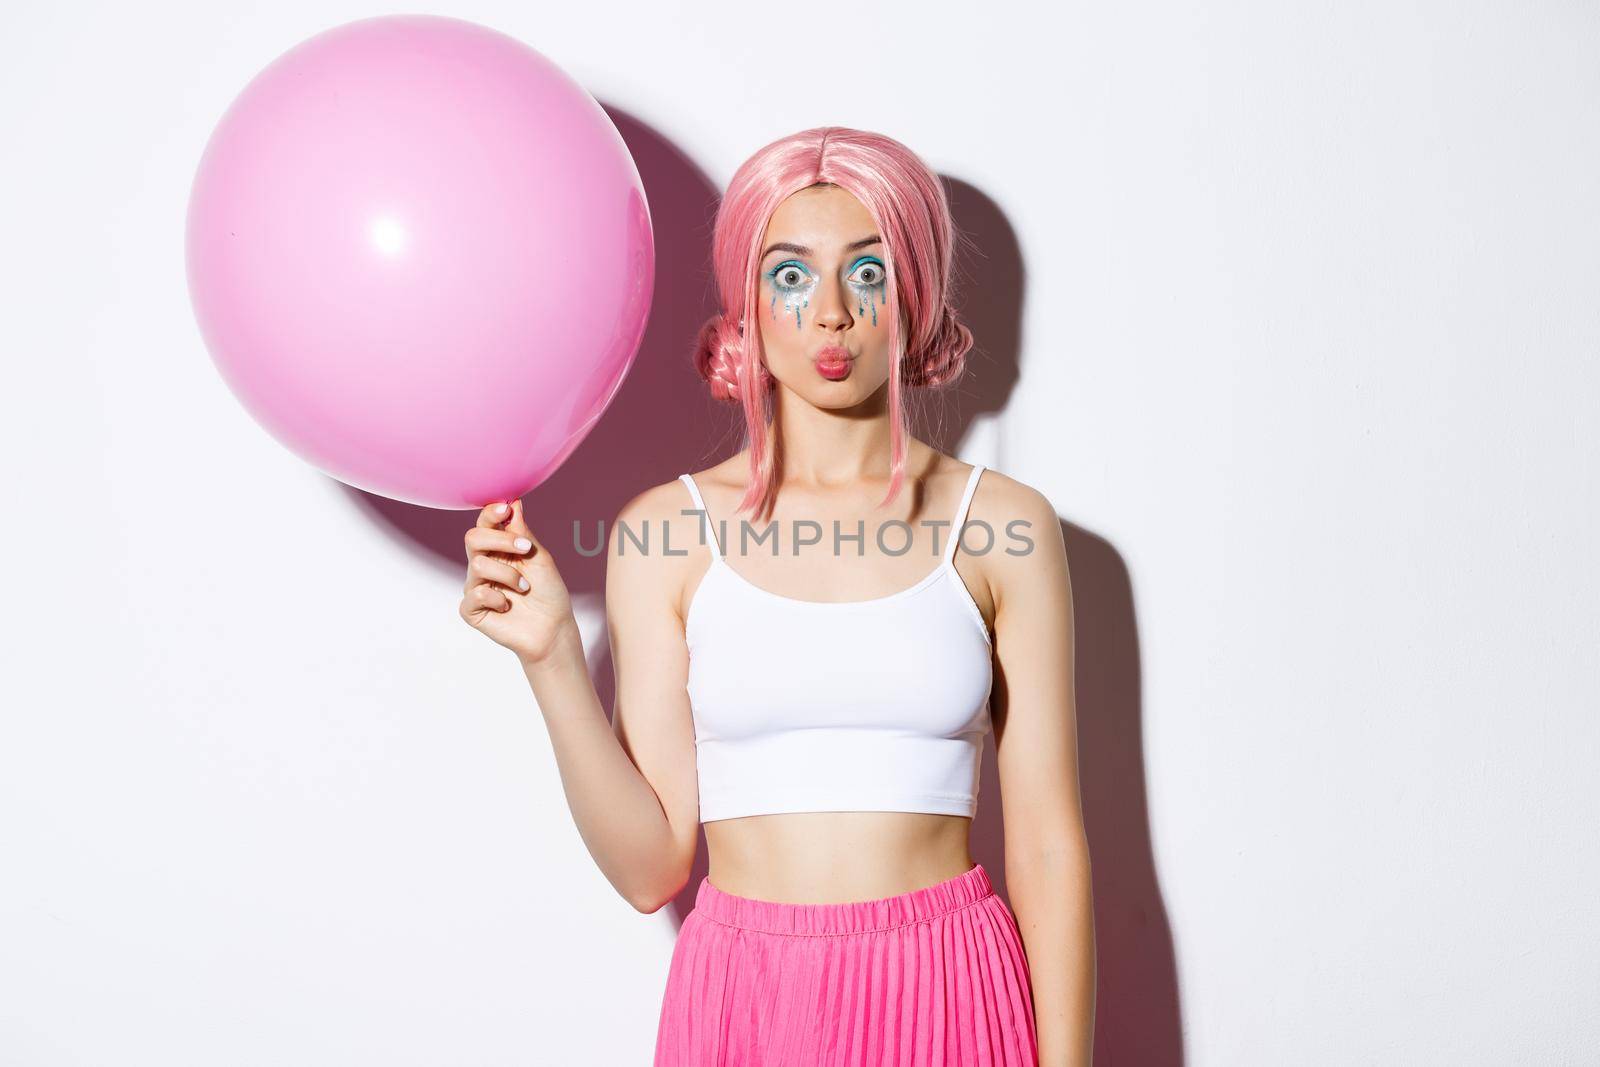 Image of silly party girl with bright makeup, pink wig, holding big cute balloon and pouting, standing over white background.